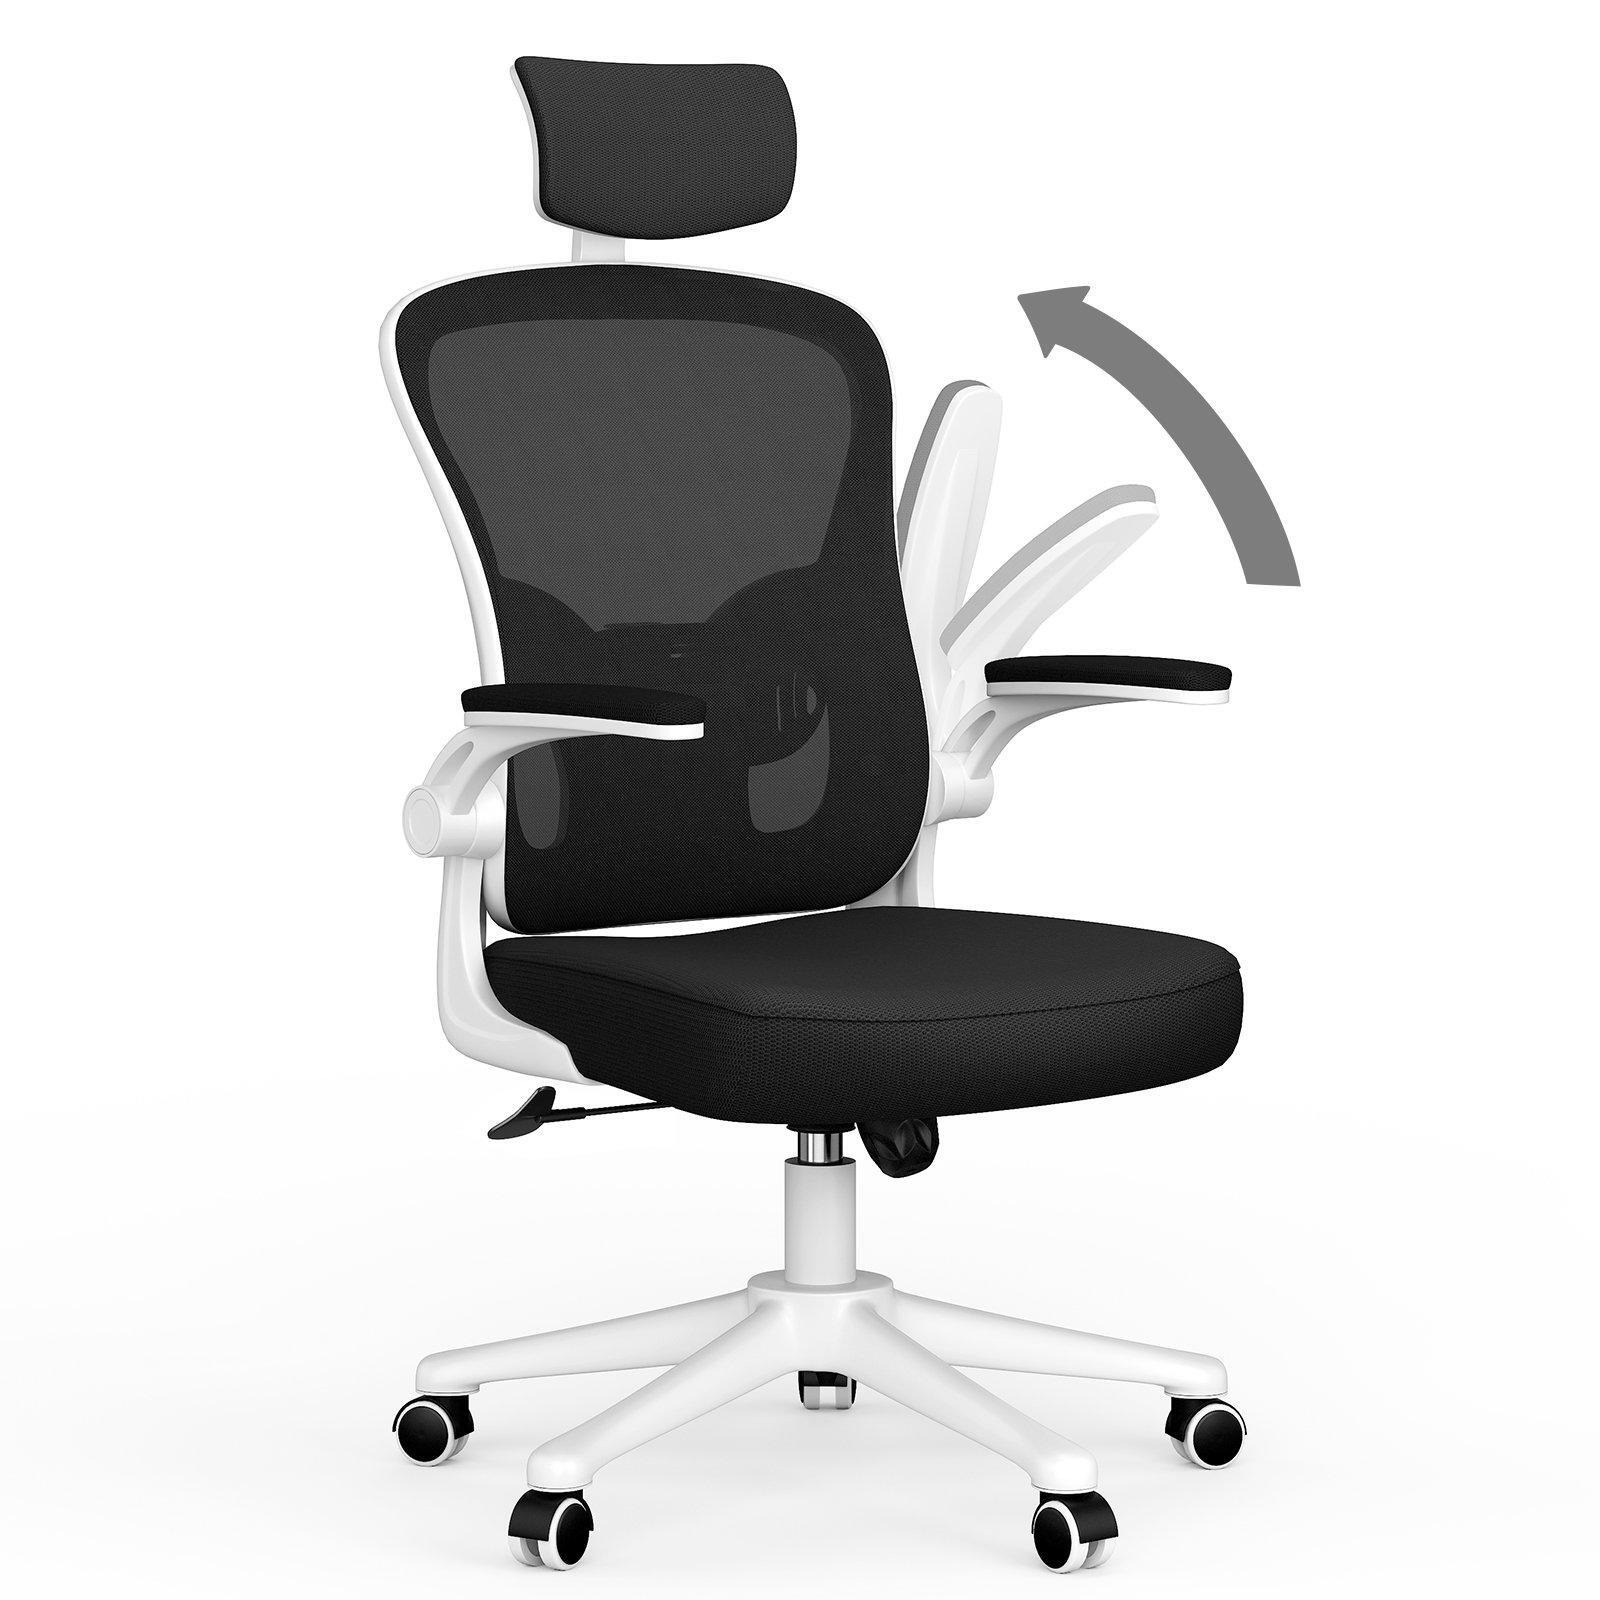 Ergonomic Office Chair with Headrest and Adjustable Armrests - image 1